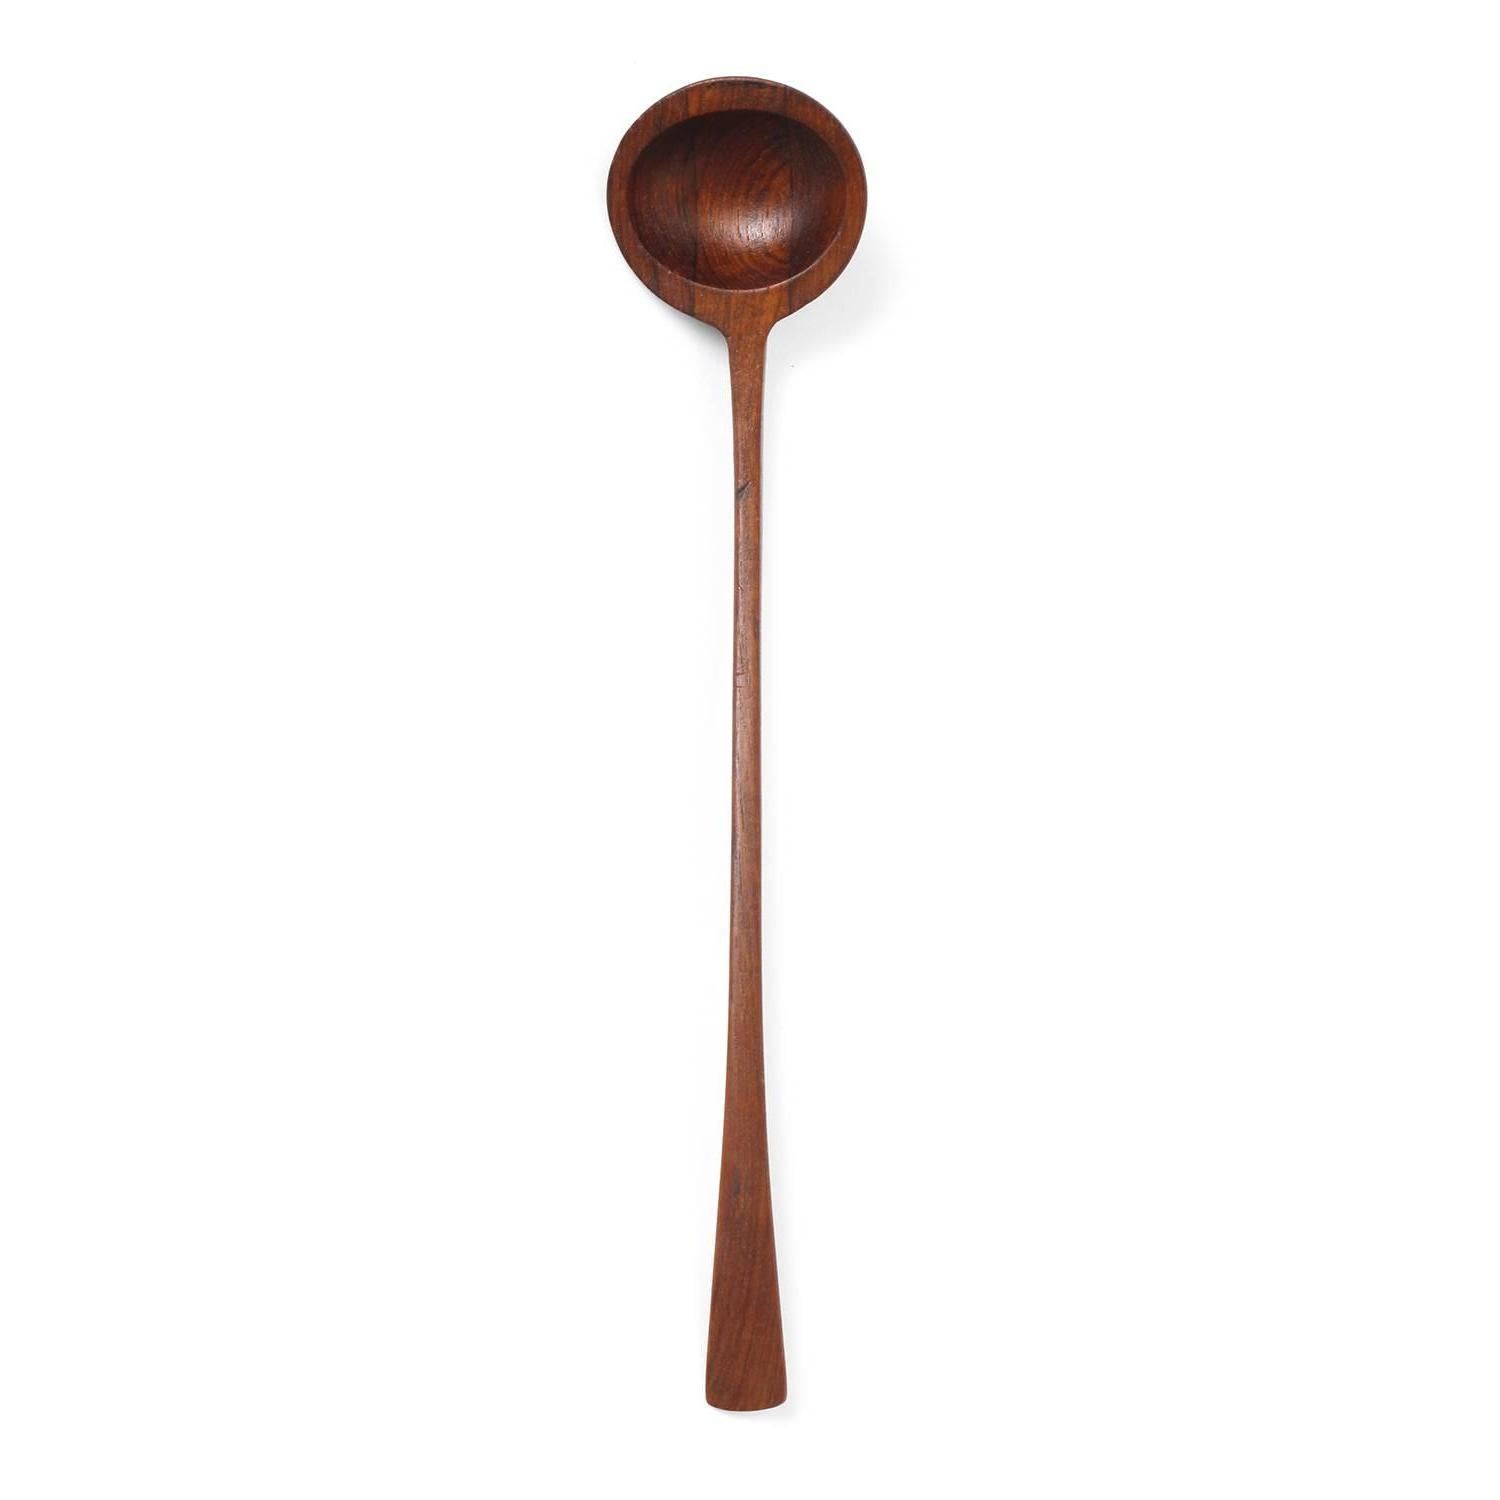 A pair of hand-carved teak serving spoons with curved elongated handles.